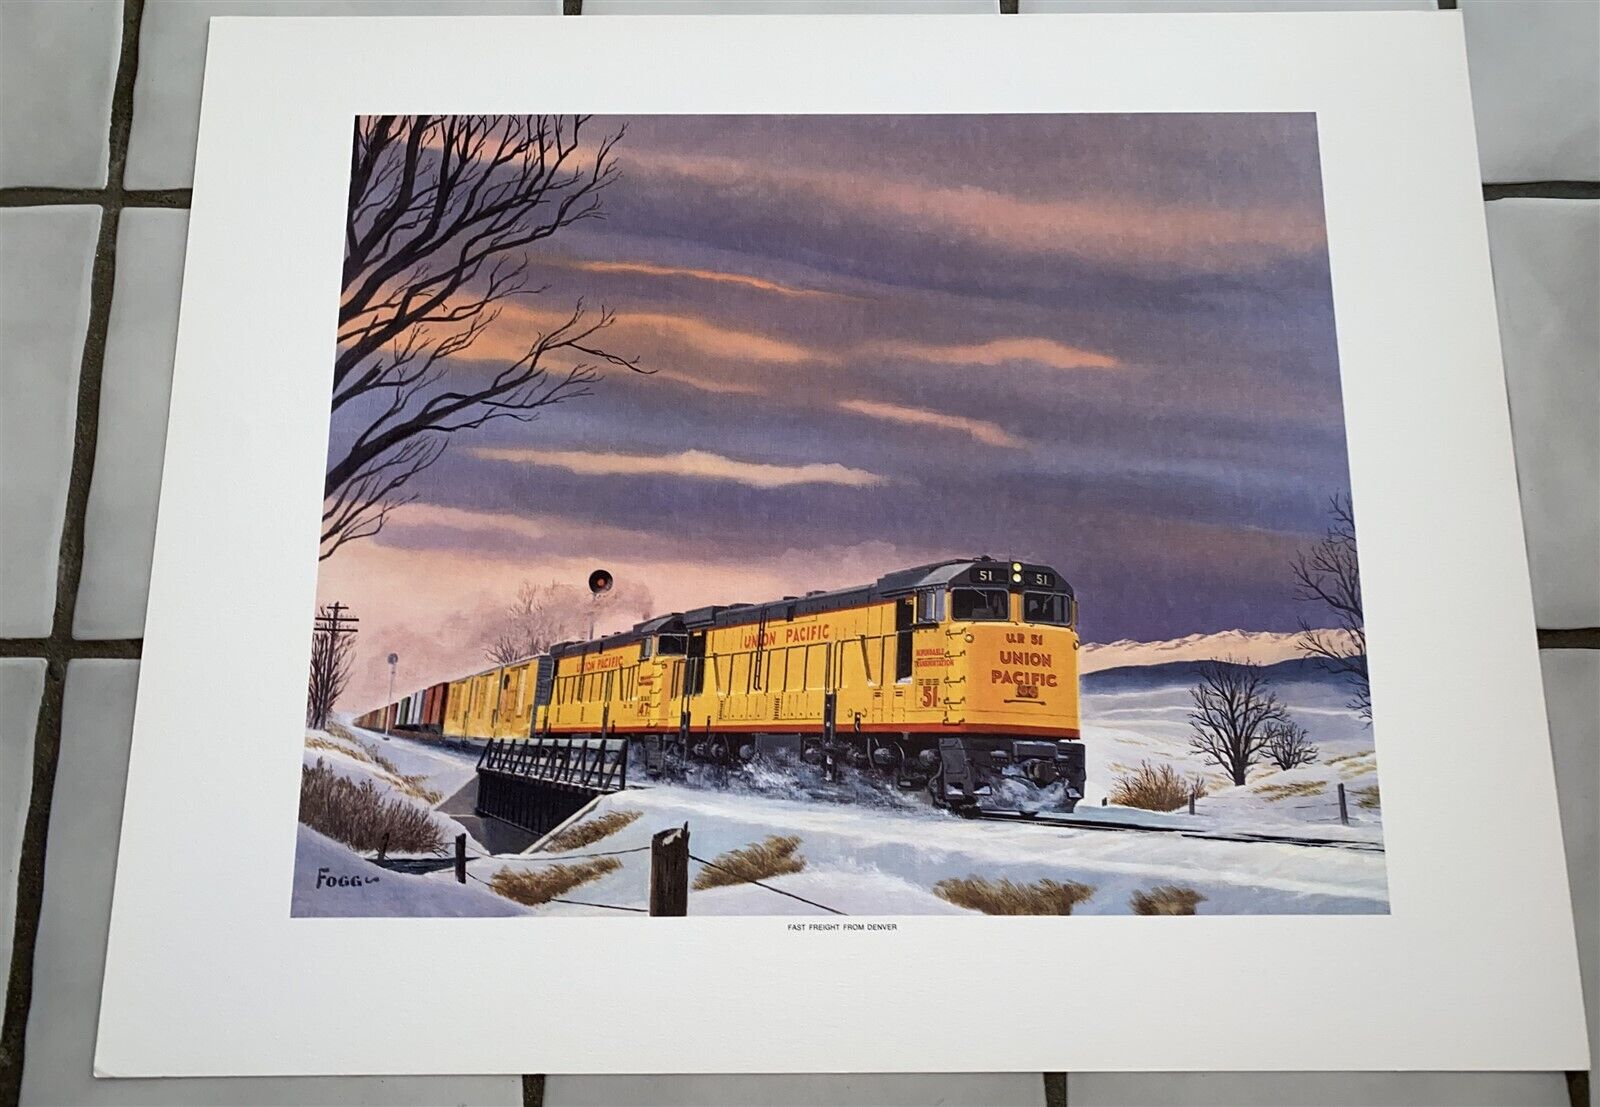 Vintage Union Pacific Railroad Poster Print Freight From Denver #51 By Fogg